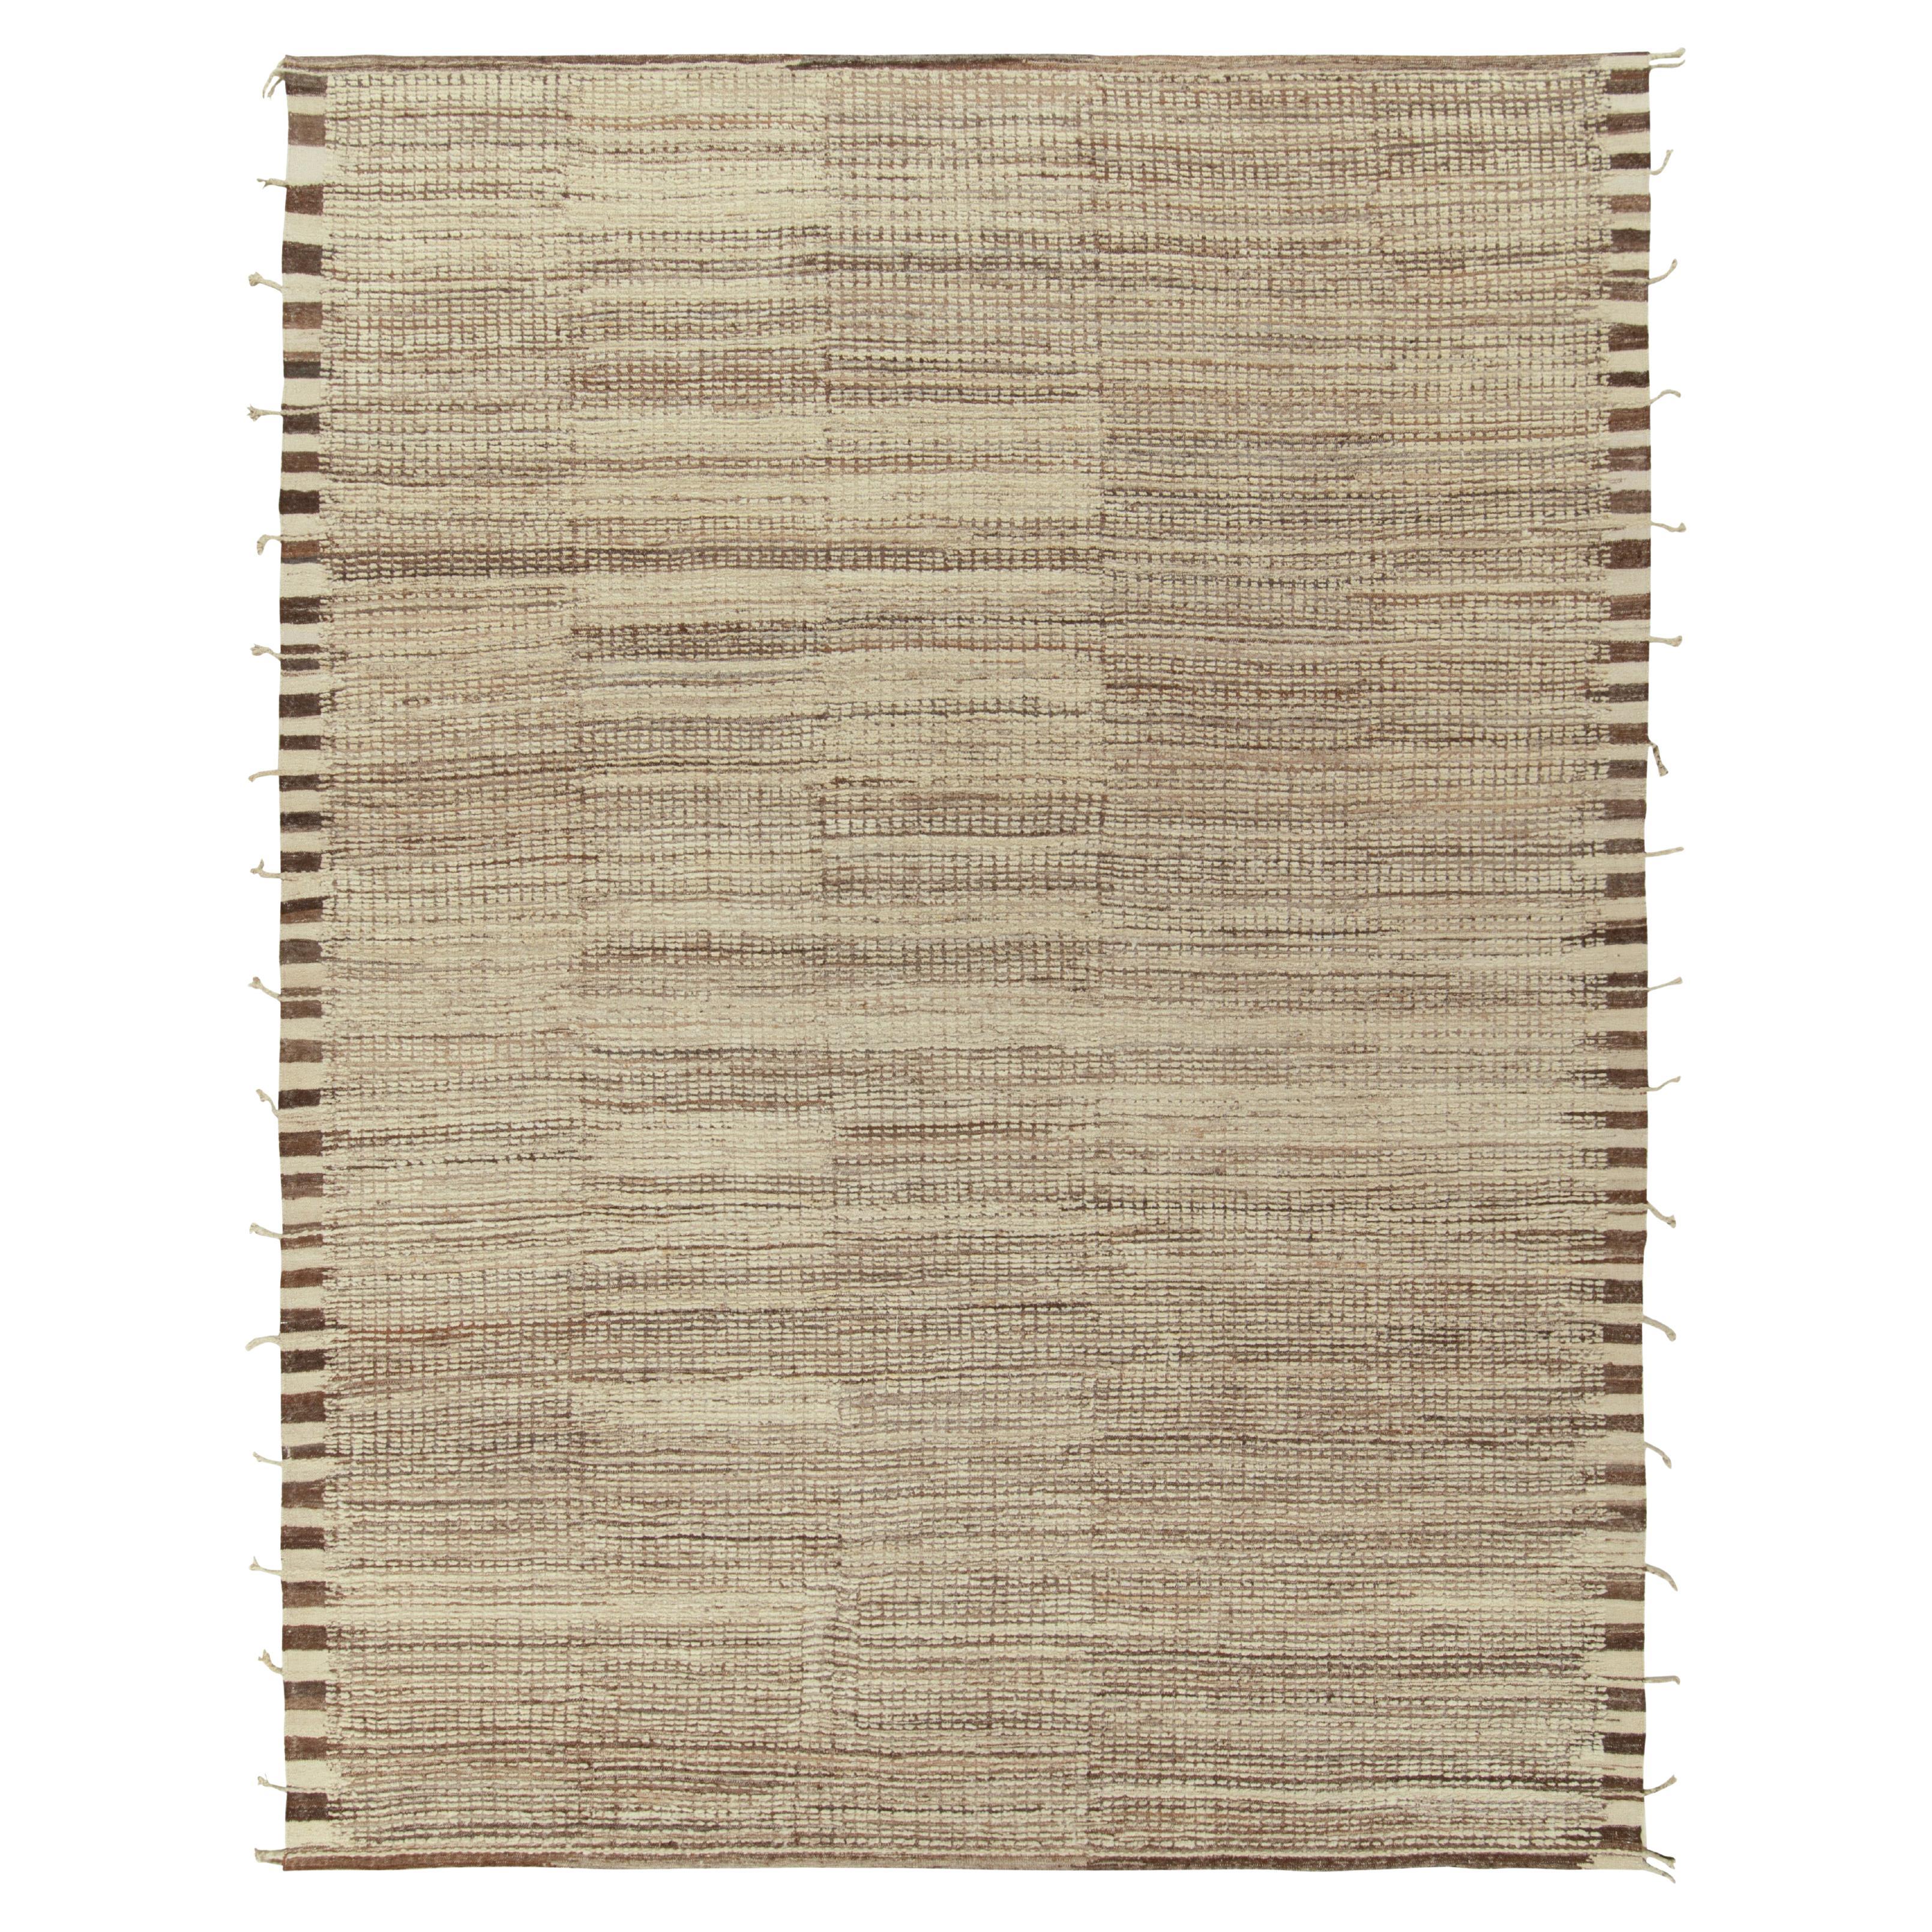 Rug & Kilim's Contemporary Moroccan Style Rug in Beige-Brown & White